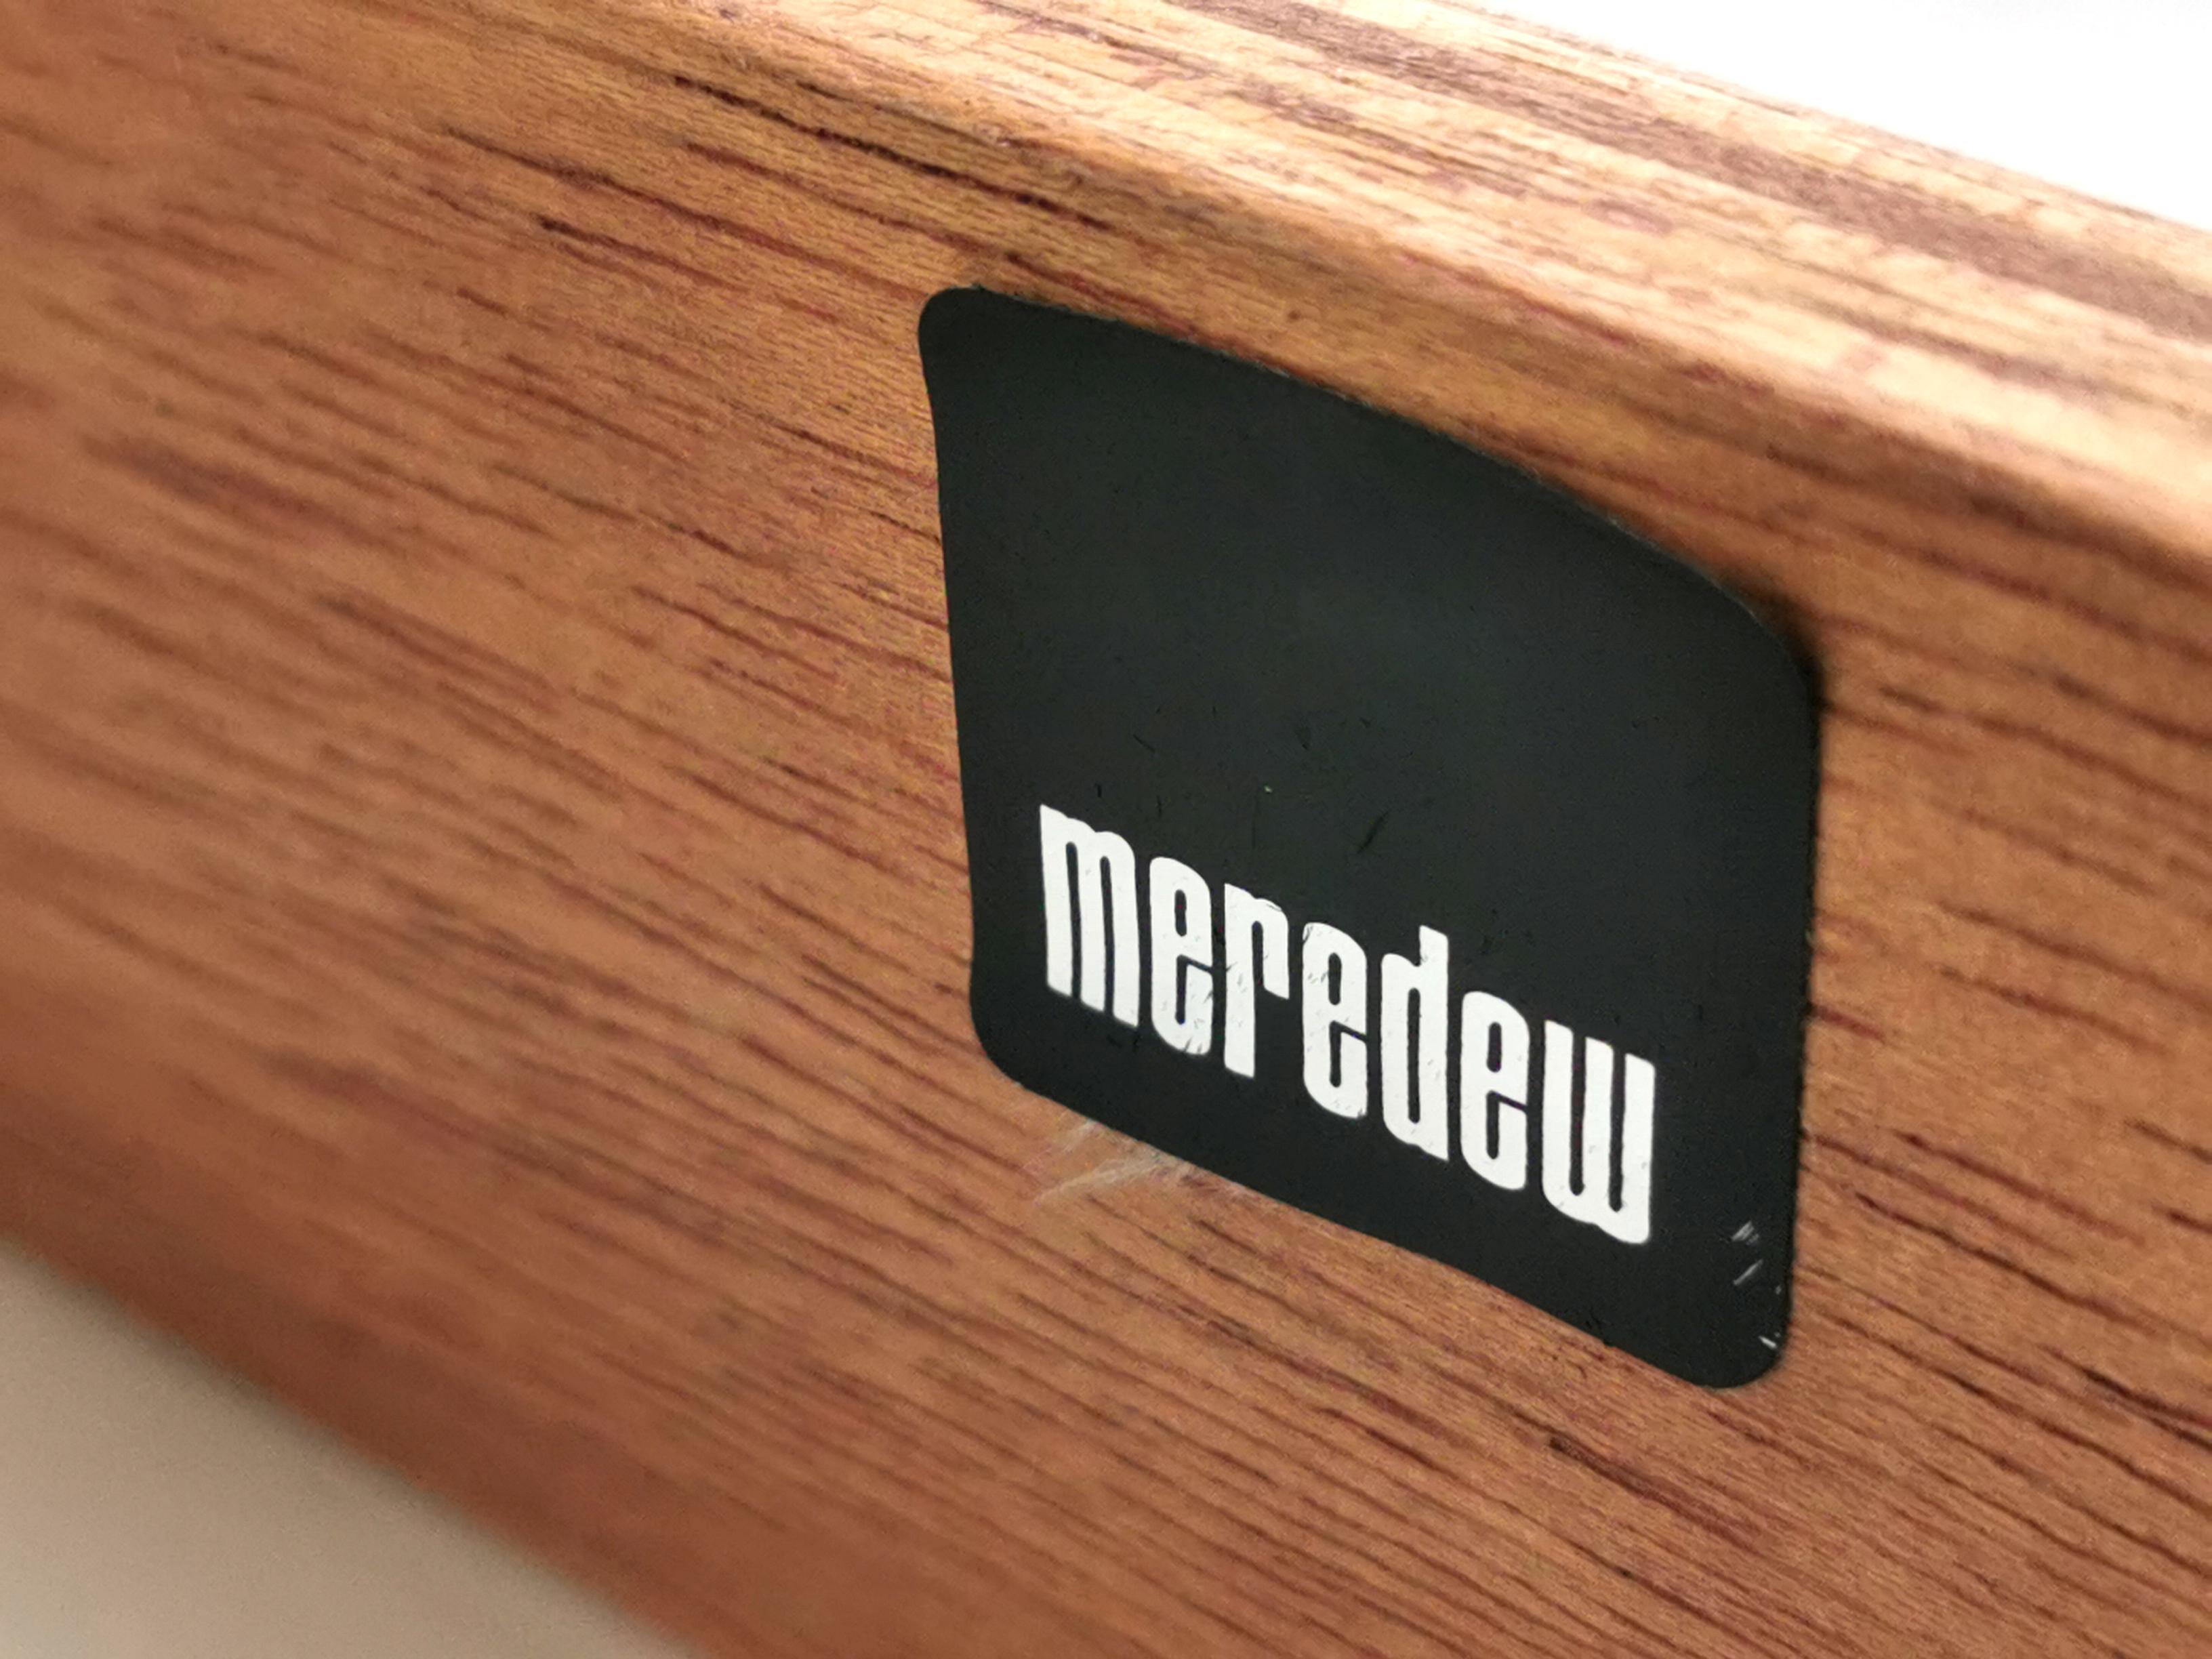 Meredew sideboard

A Danish inspired blonde oak chest of drawers manufactured by Meredew. 

This chest of drawers has very simplistic lines and beautifully carved drawer pulls. 

Featuring six very generous sized drawers. 

Made in the UK,